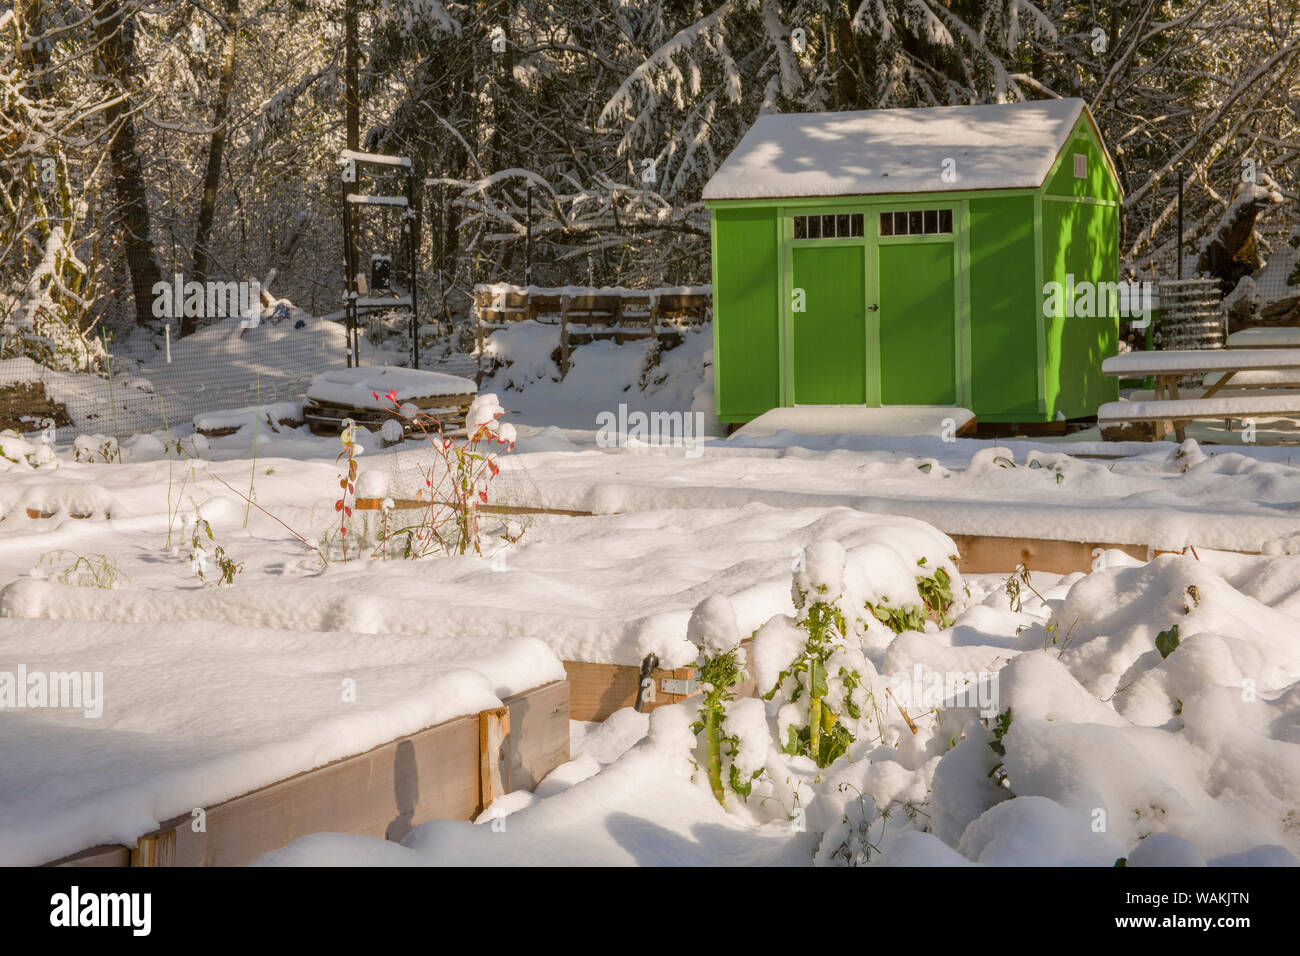 Issaquah, Washington State, USA. Snow-covered Mirrormont Pea Patch garden with raised beds and shed. (PR) Stock Photo